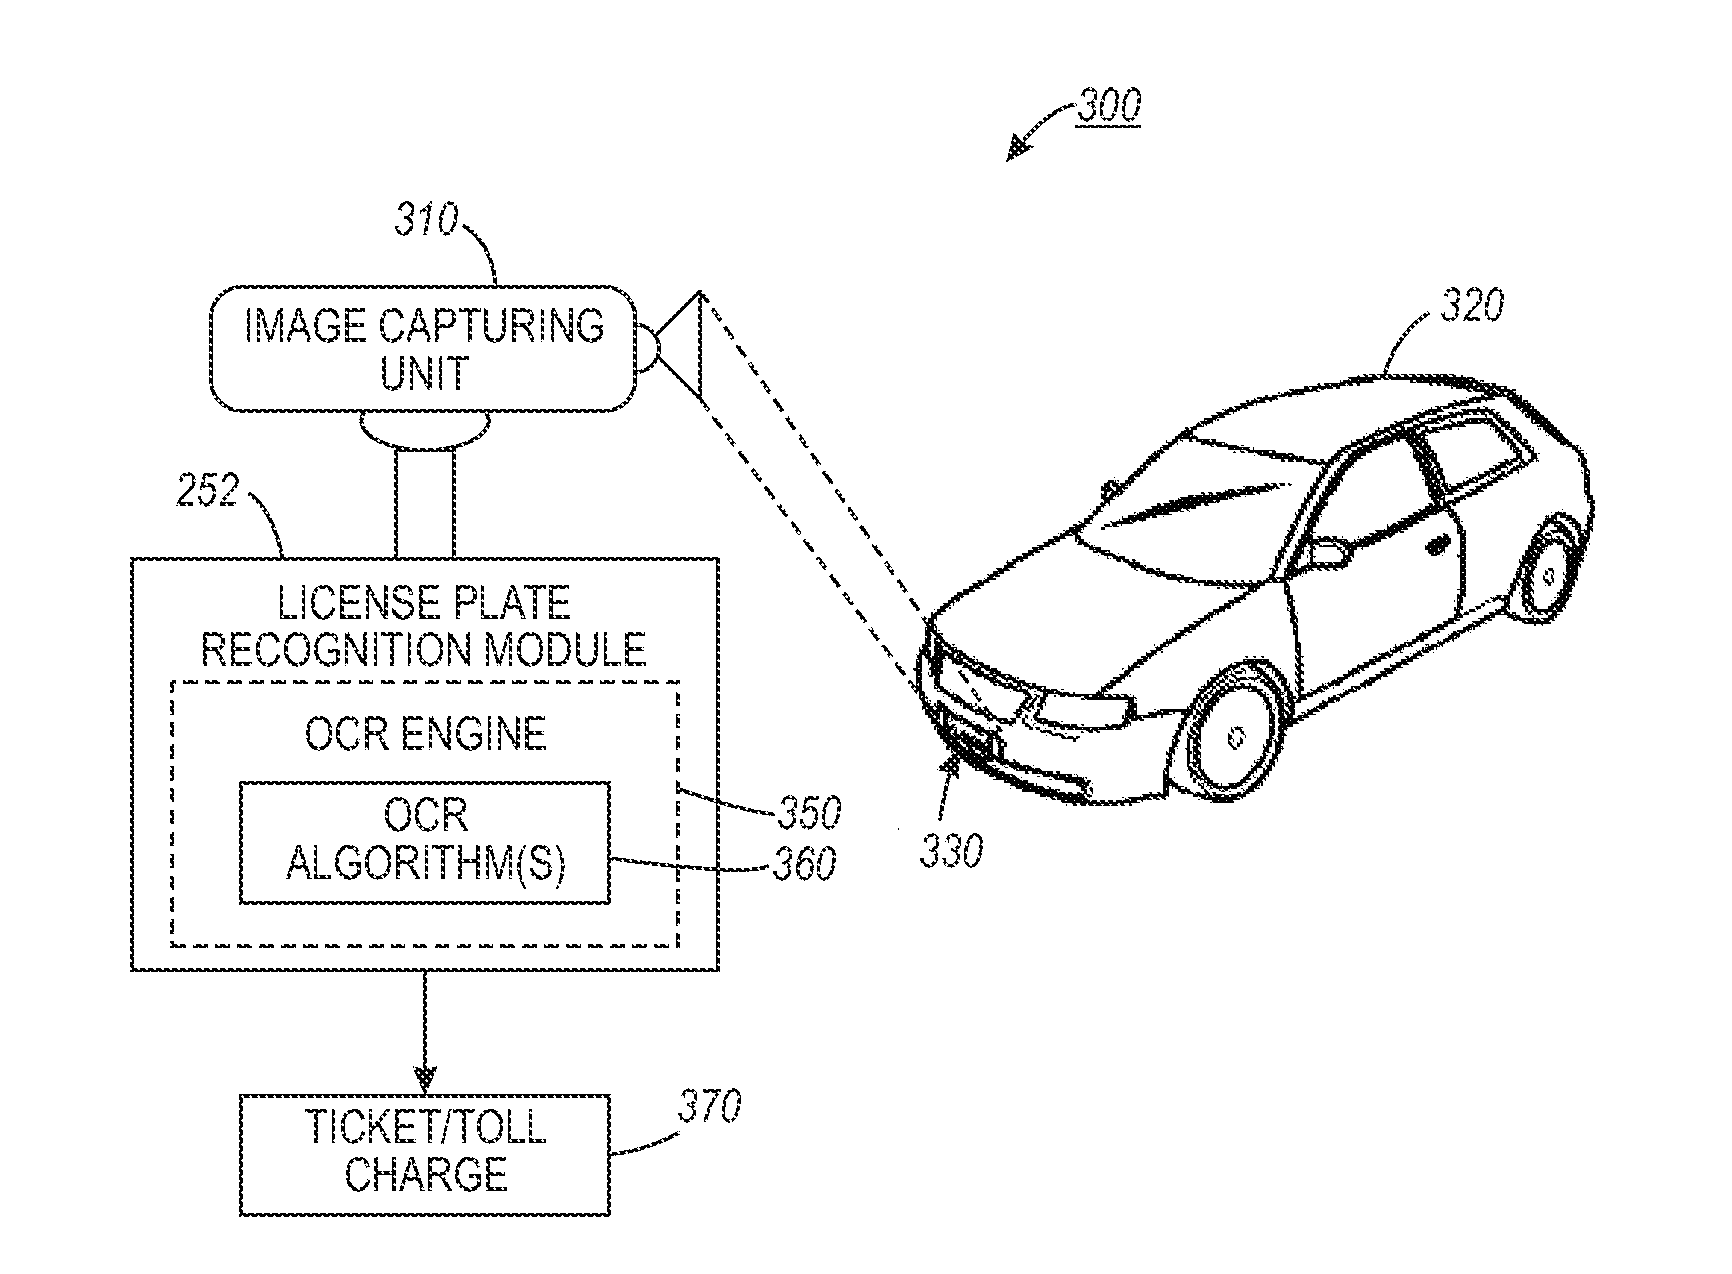 Automated license plate recognition system and method using human-in-the-loop based adaptive learning